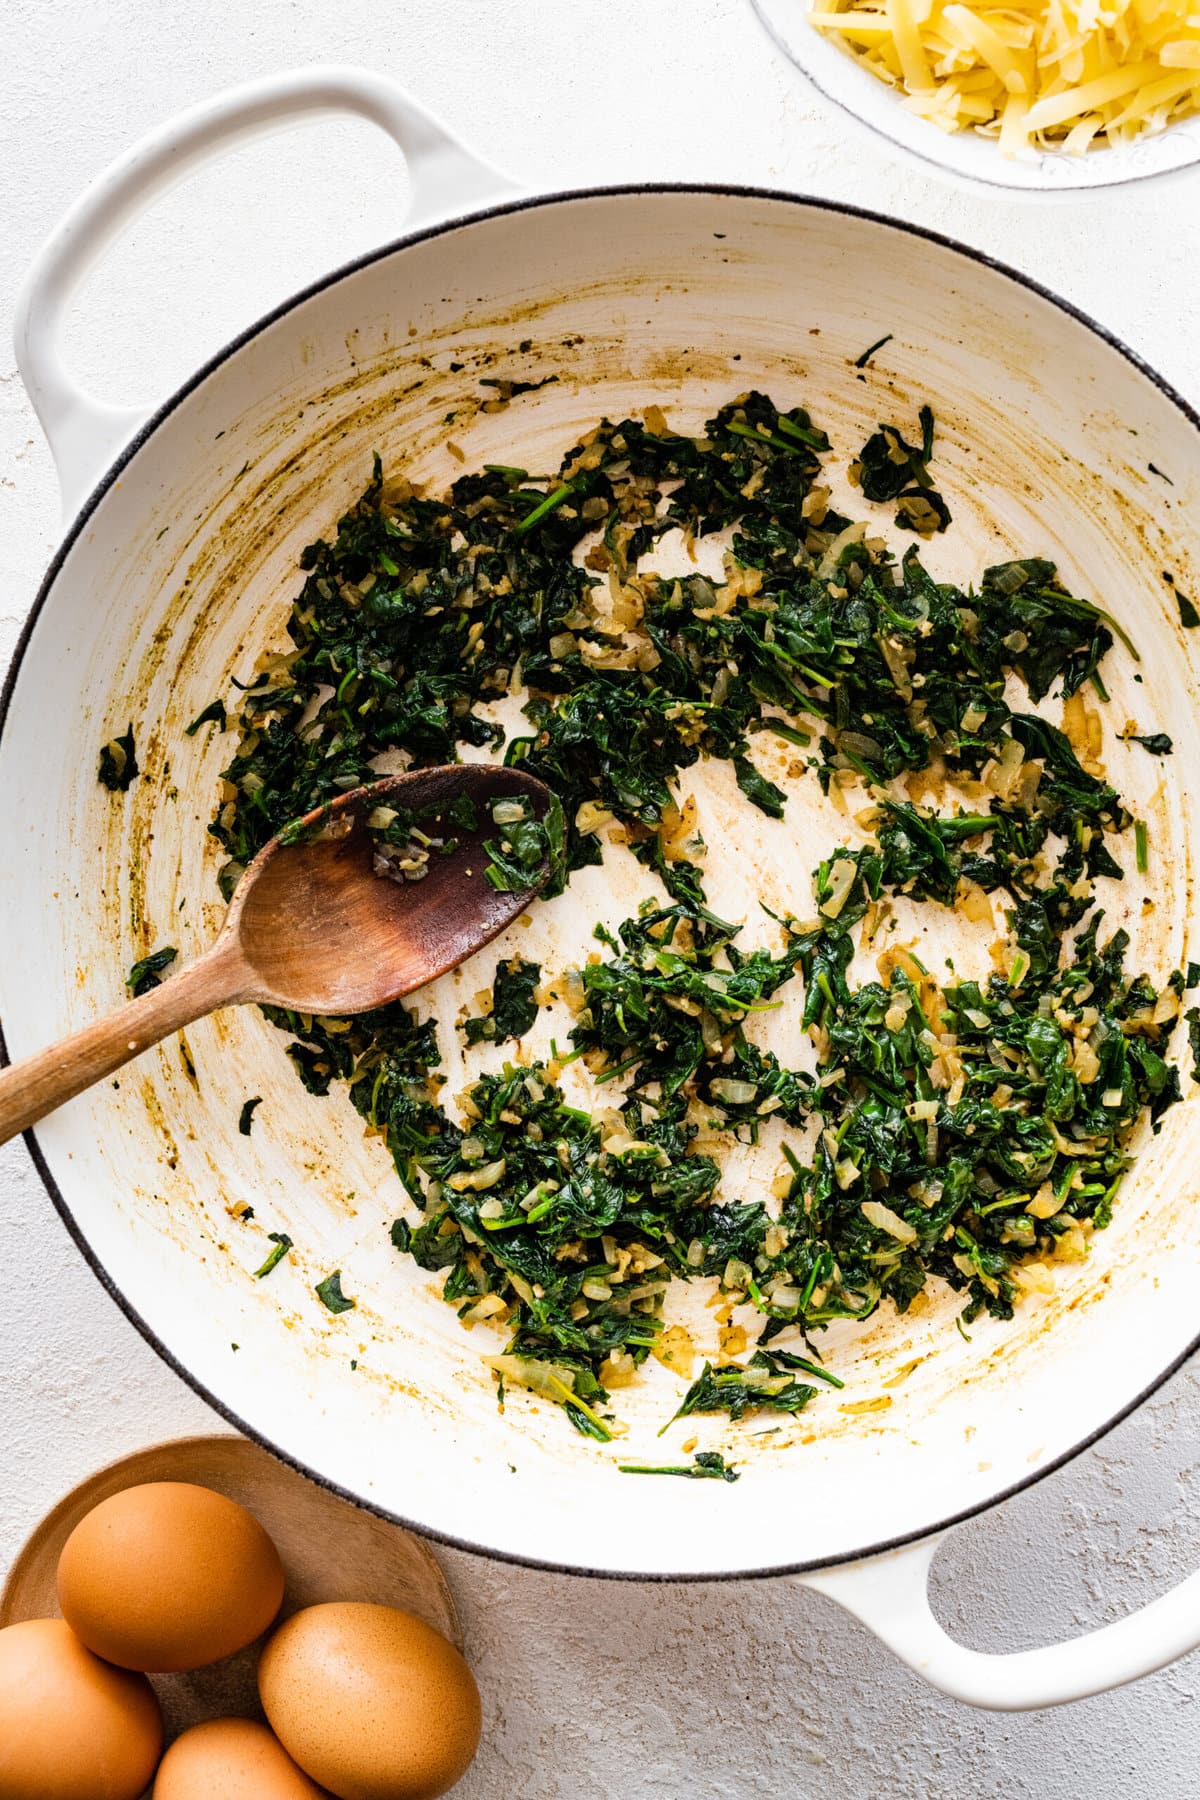 How to make spinach quiche step-by-step: cook spinach until wilted.